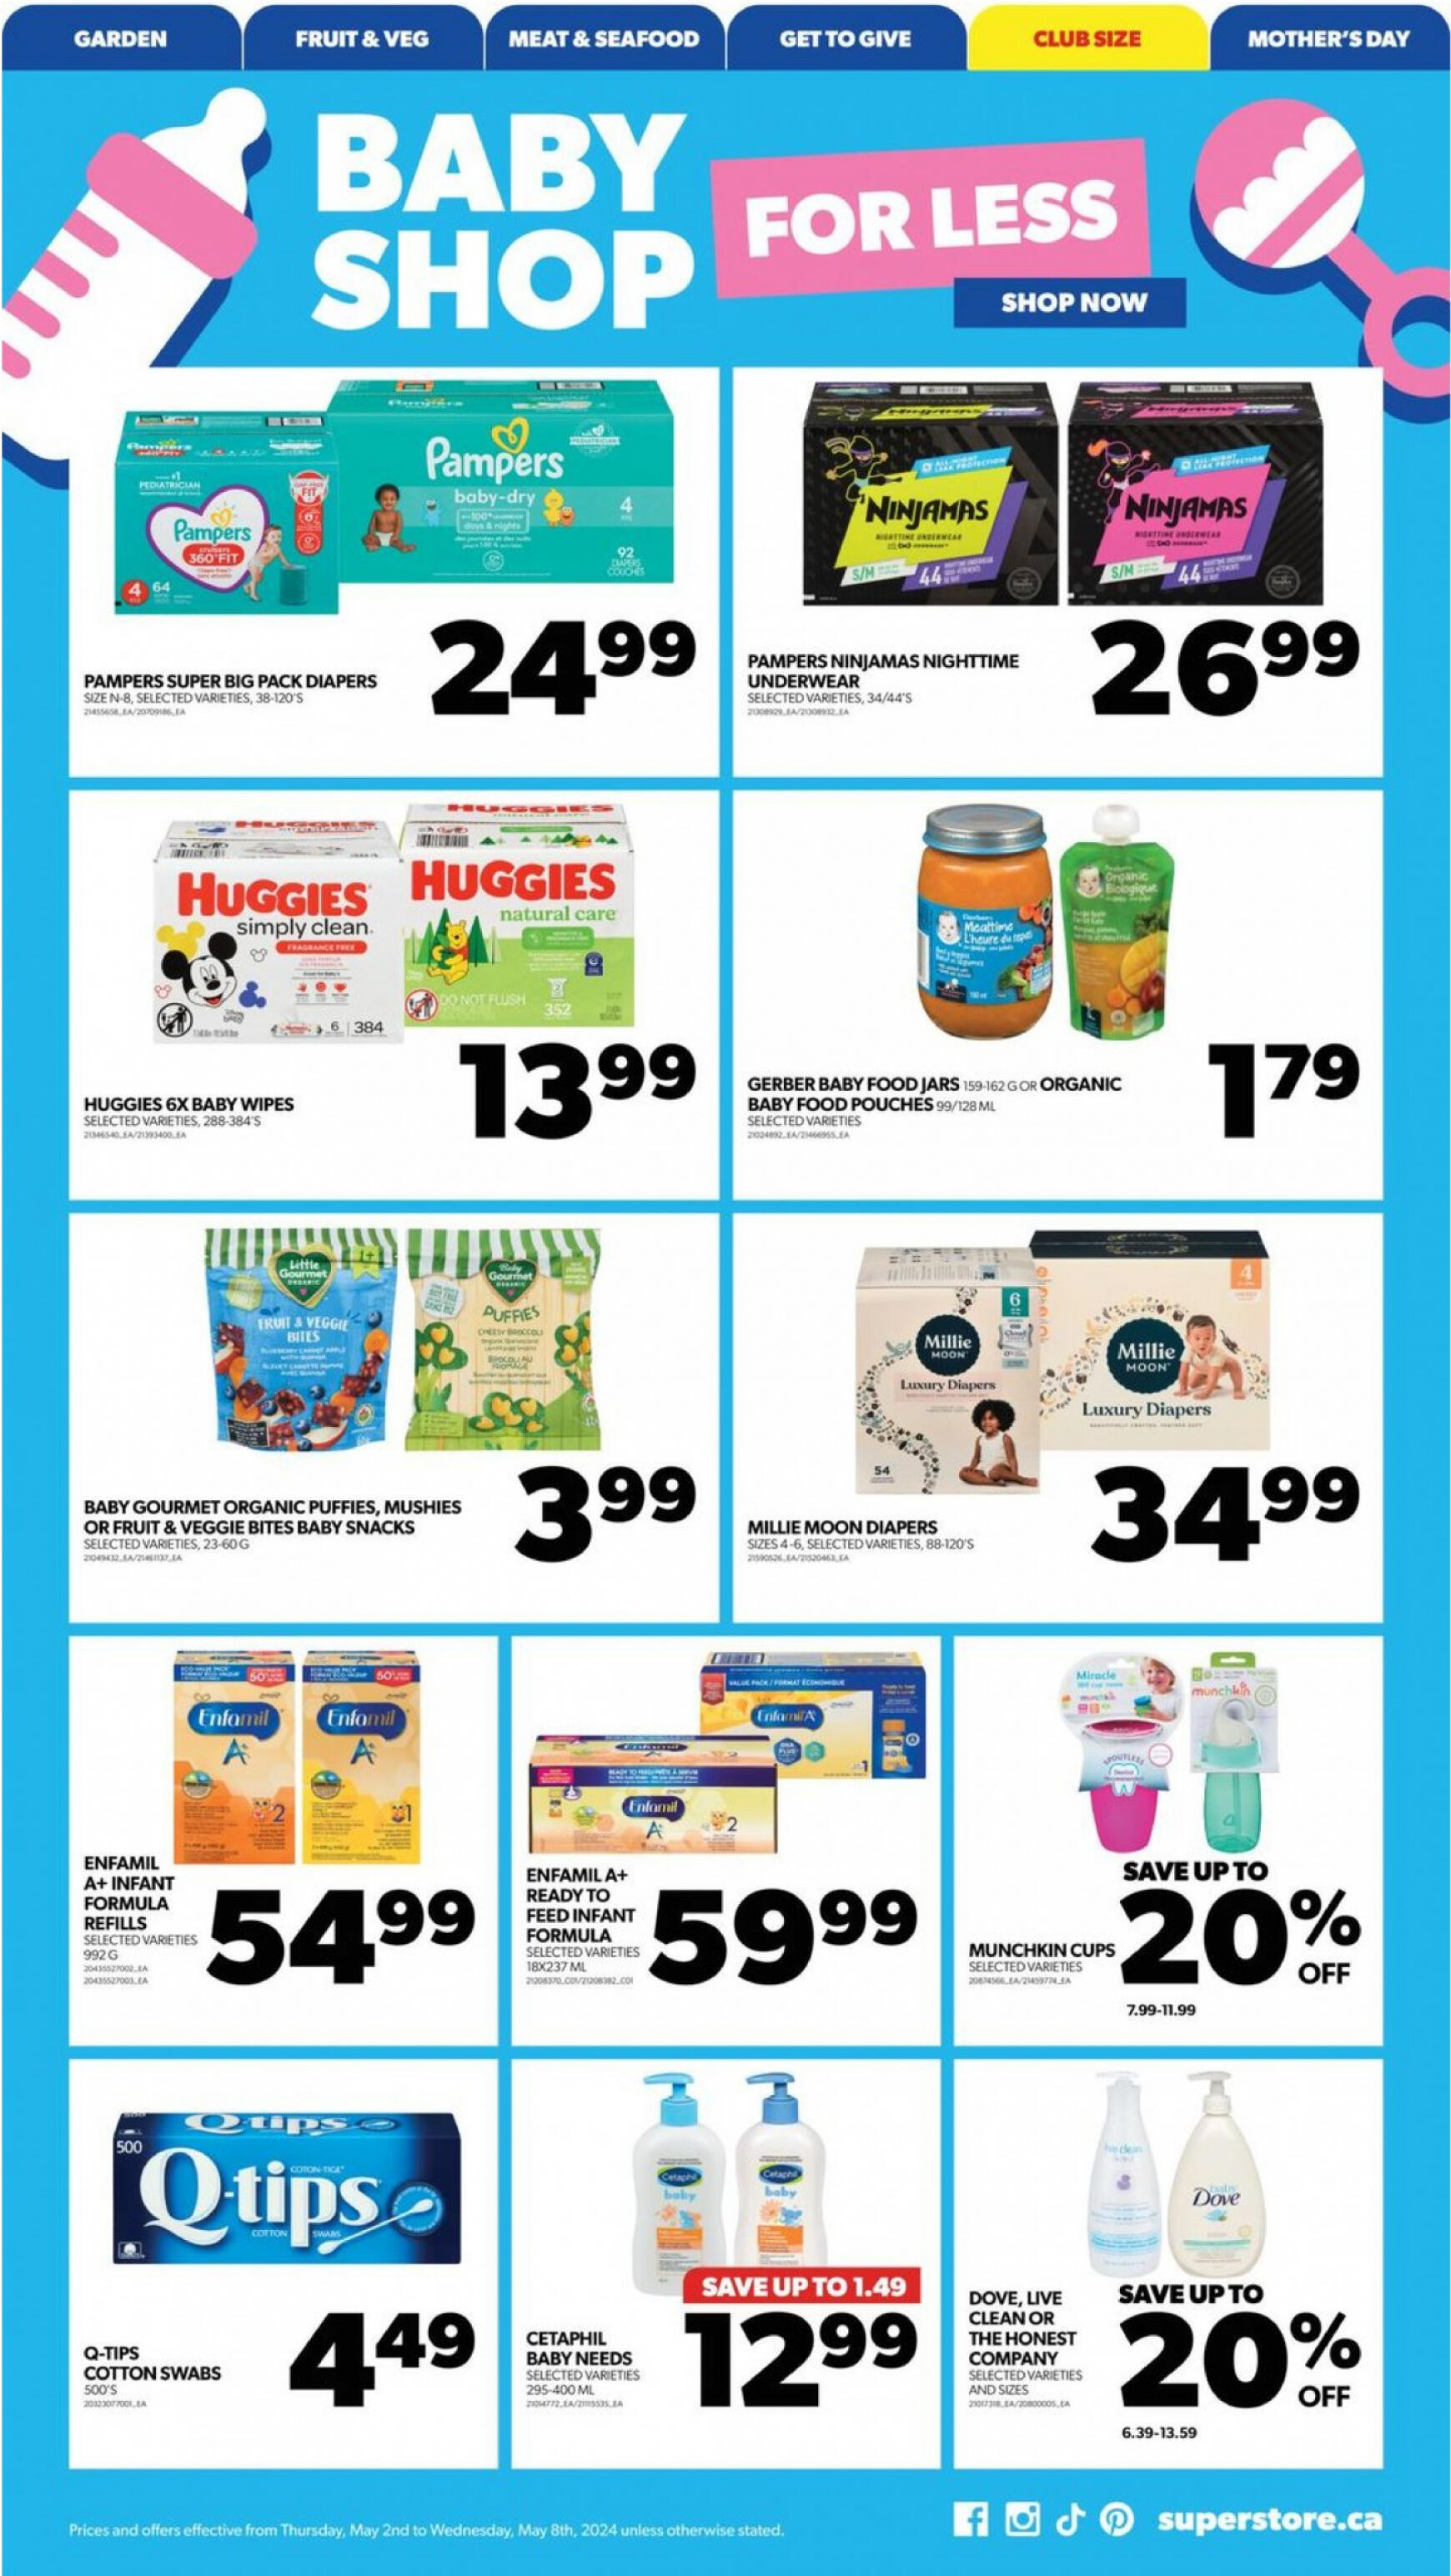 real-canadian-superstore - Real Canadian Superstore flyer current 02.05. - 08.05. - page: 22